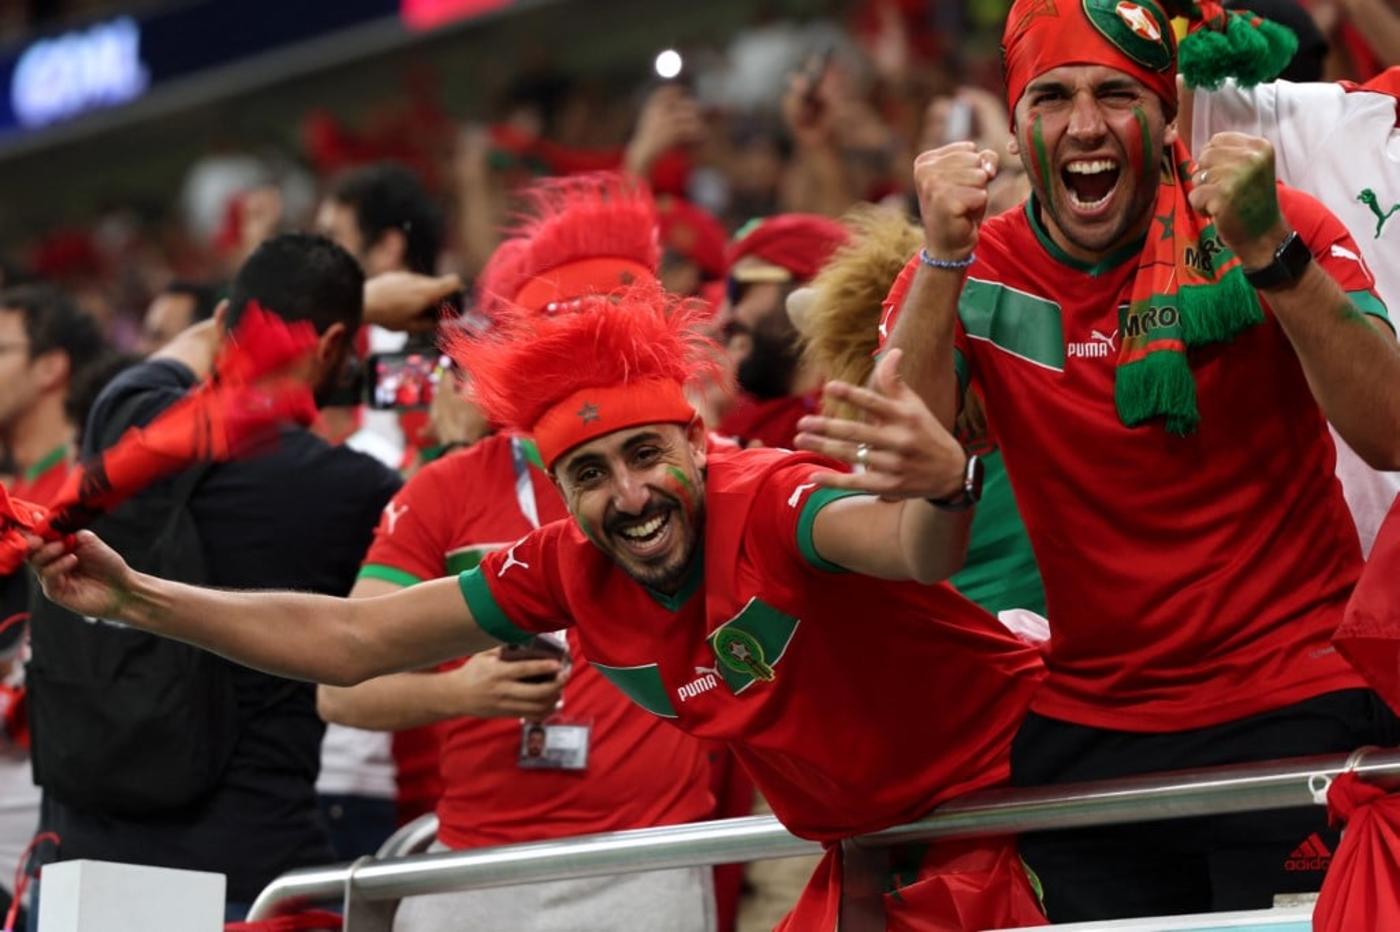 Morocco fans cheer during the Qatar 2022 World Cup Group F football match between Belgium and Morocco at the Al-Thumama Stadium in Doha on 27 November 2022 (AFP)